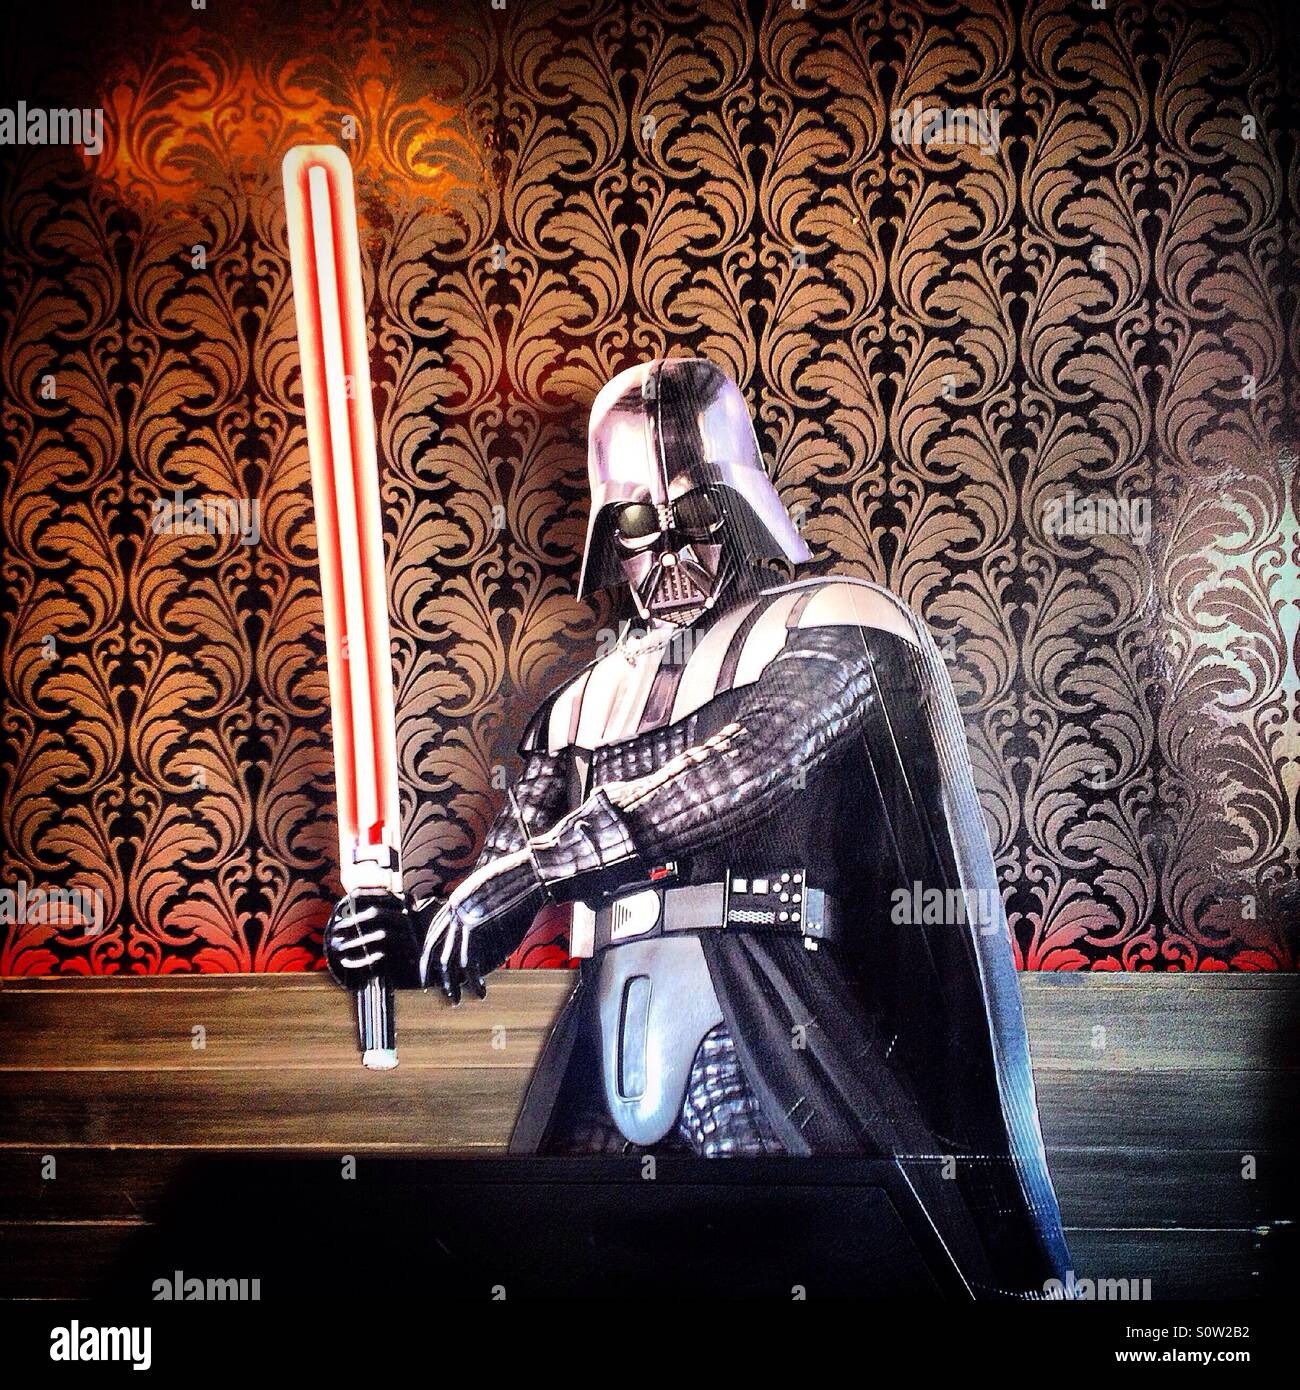 An image of Anakin Skywalker or Darth Vader from Star Wars film decorate Obscuro (Dark) ice cream shop in Colonia Roma, Mexico City, Mexico Stock Photo